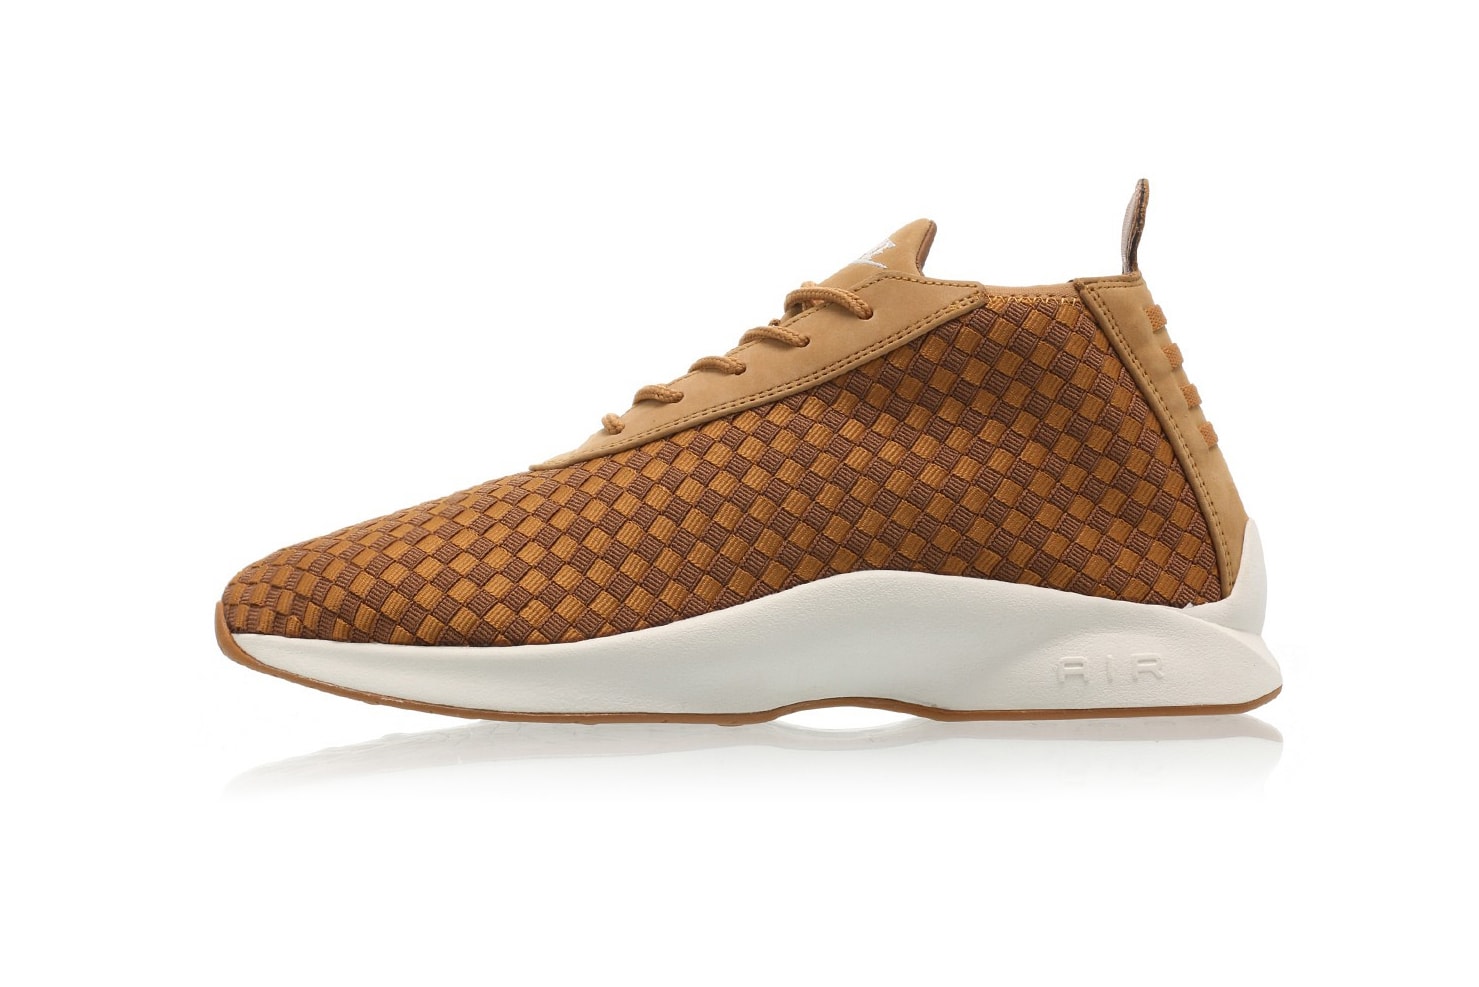 Nike Air Woven Boot Wheat Flax 2017 October Release Date Info Sneakers Shoes Footwear Titolo